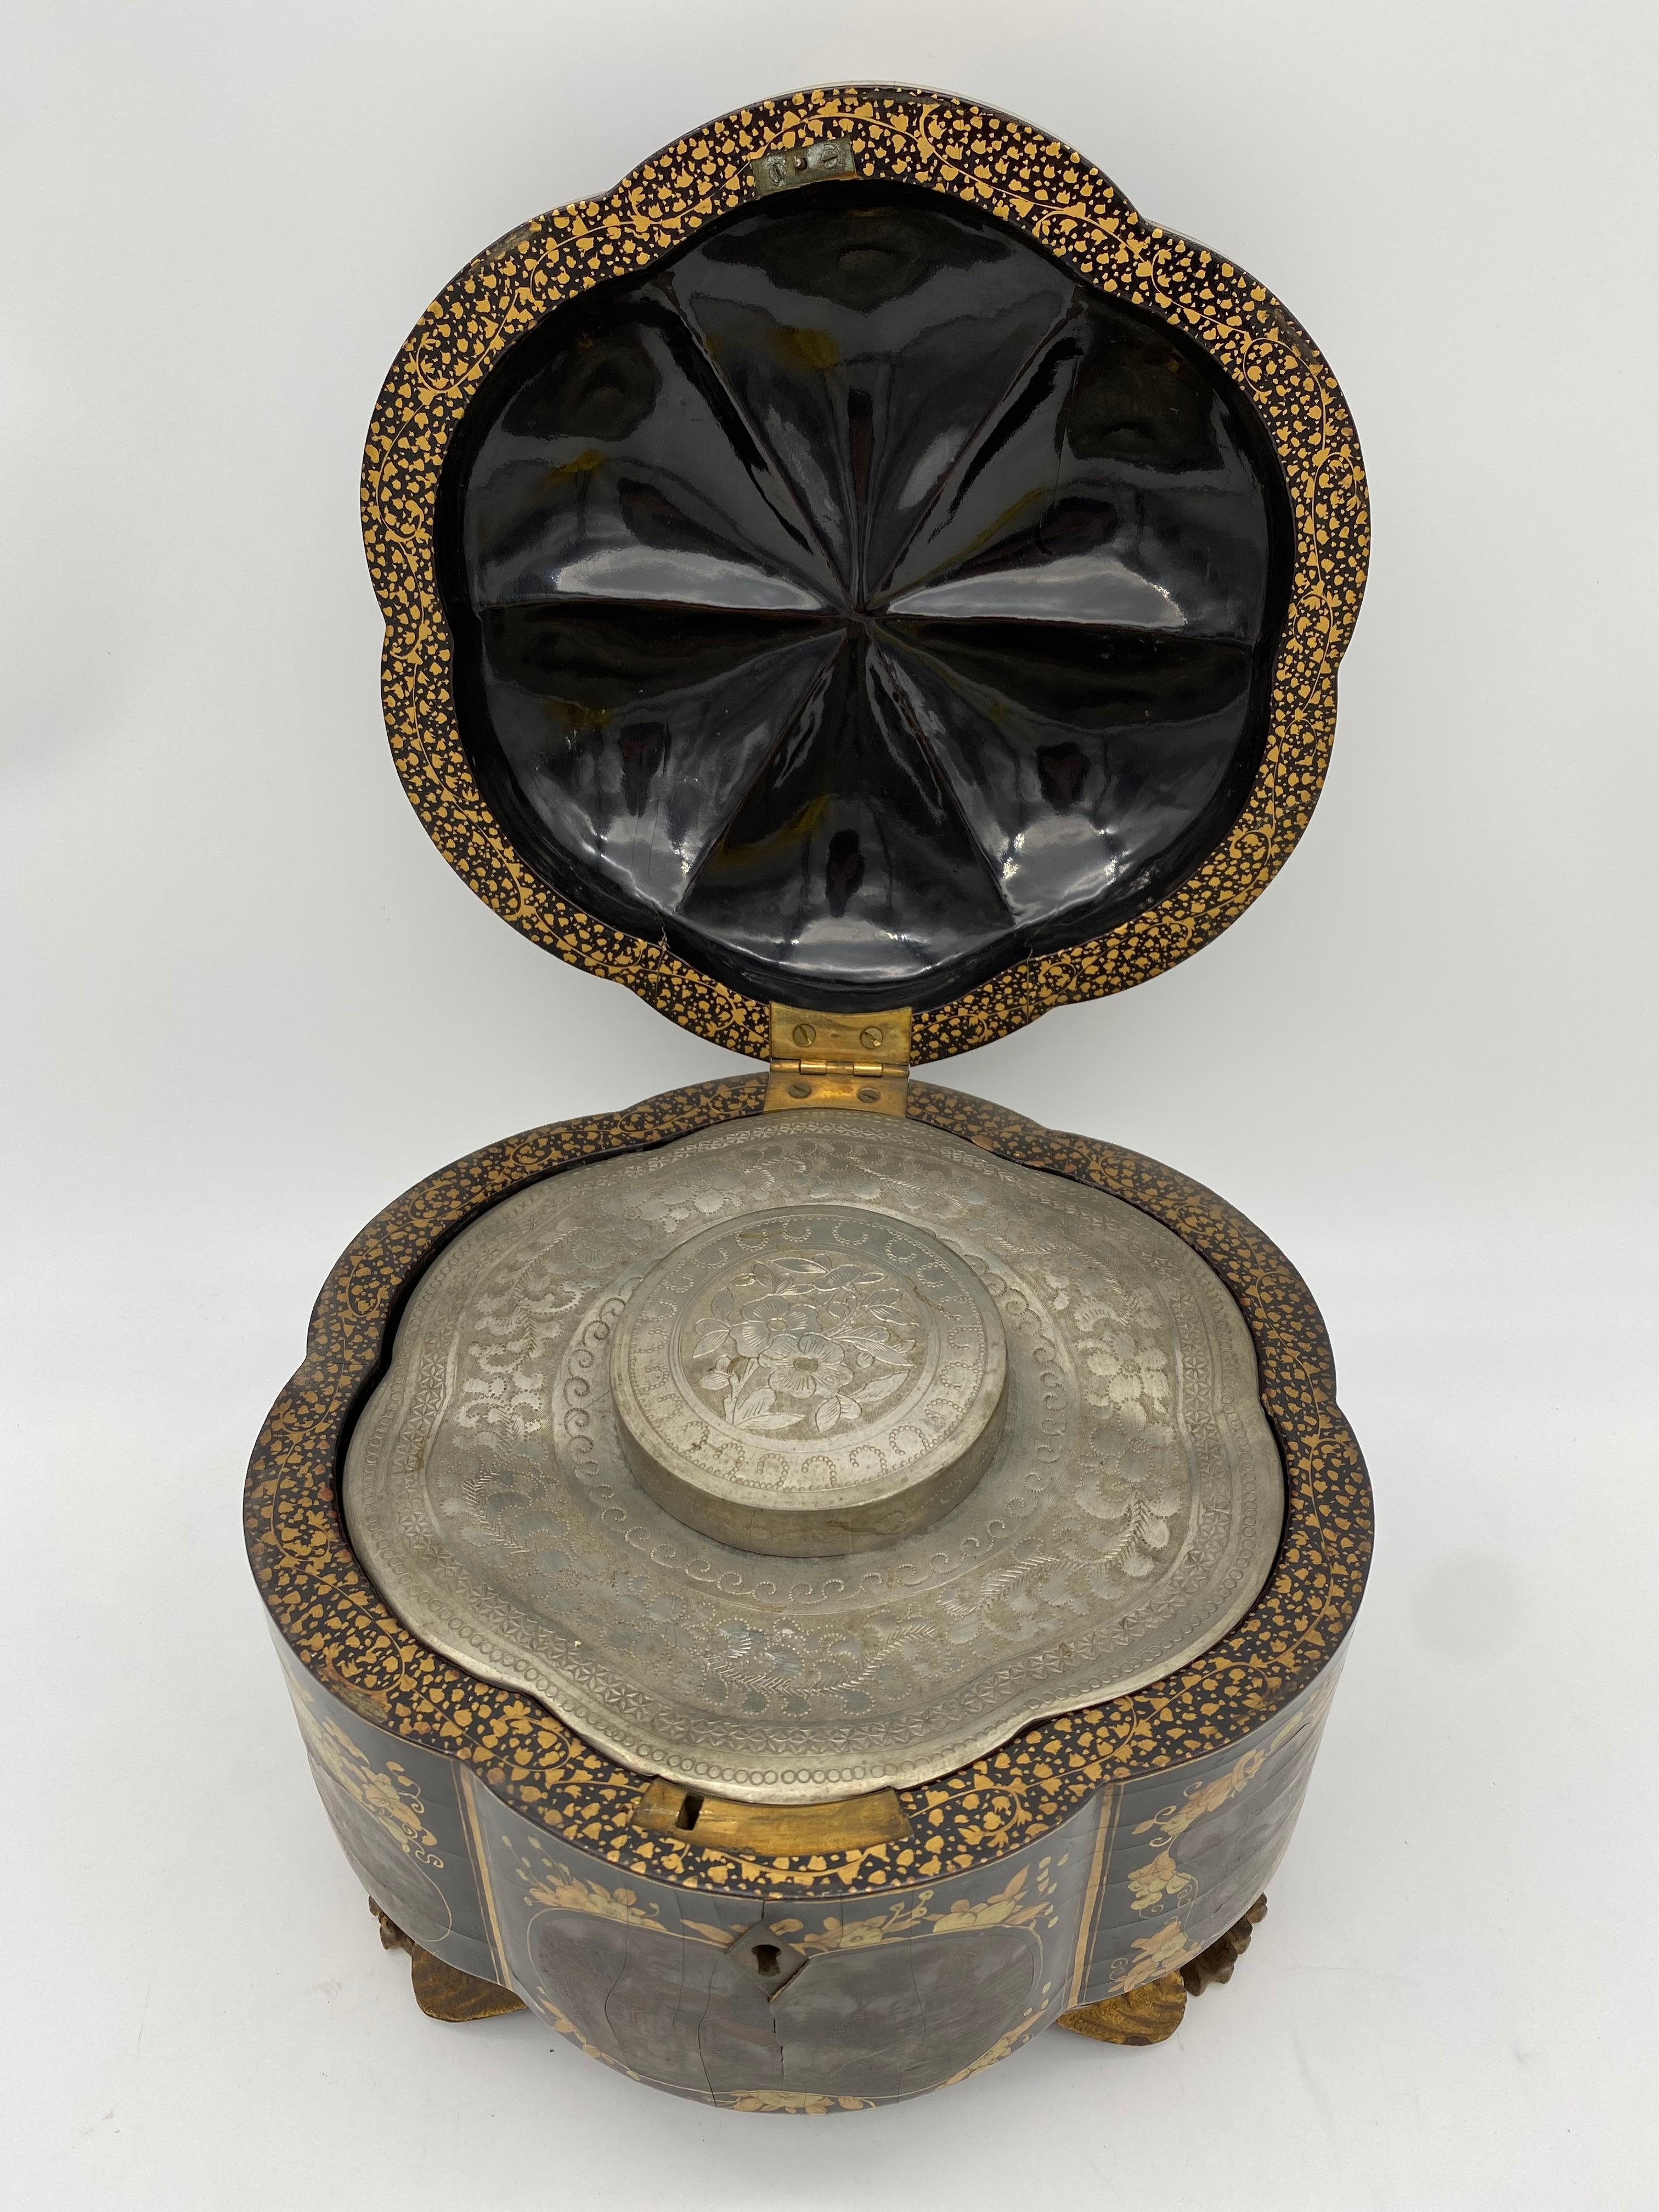 19th century golden black lacquer Chinese tea caddy with pewter and a key, the special shape body decorated with hand paint courtyard, a very beautiful piece. See more pictures, measures: 7